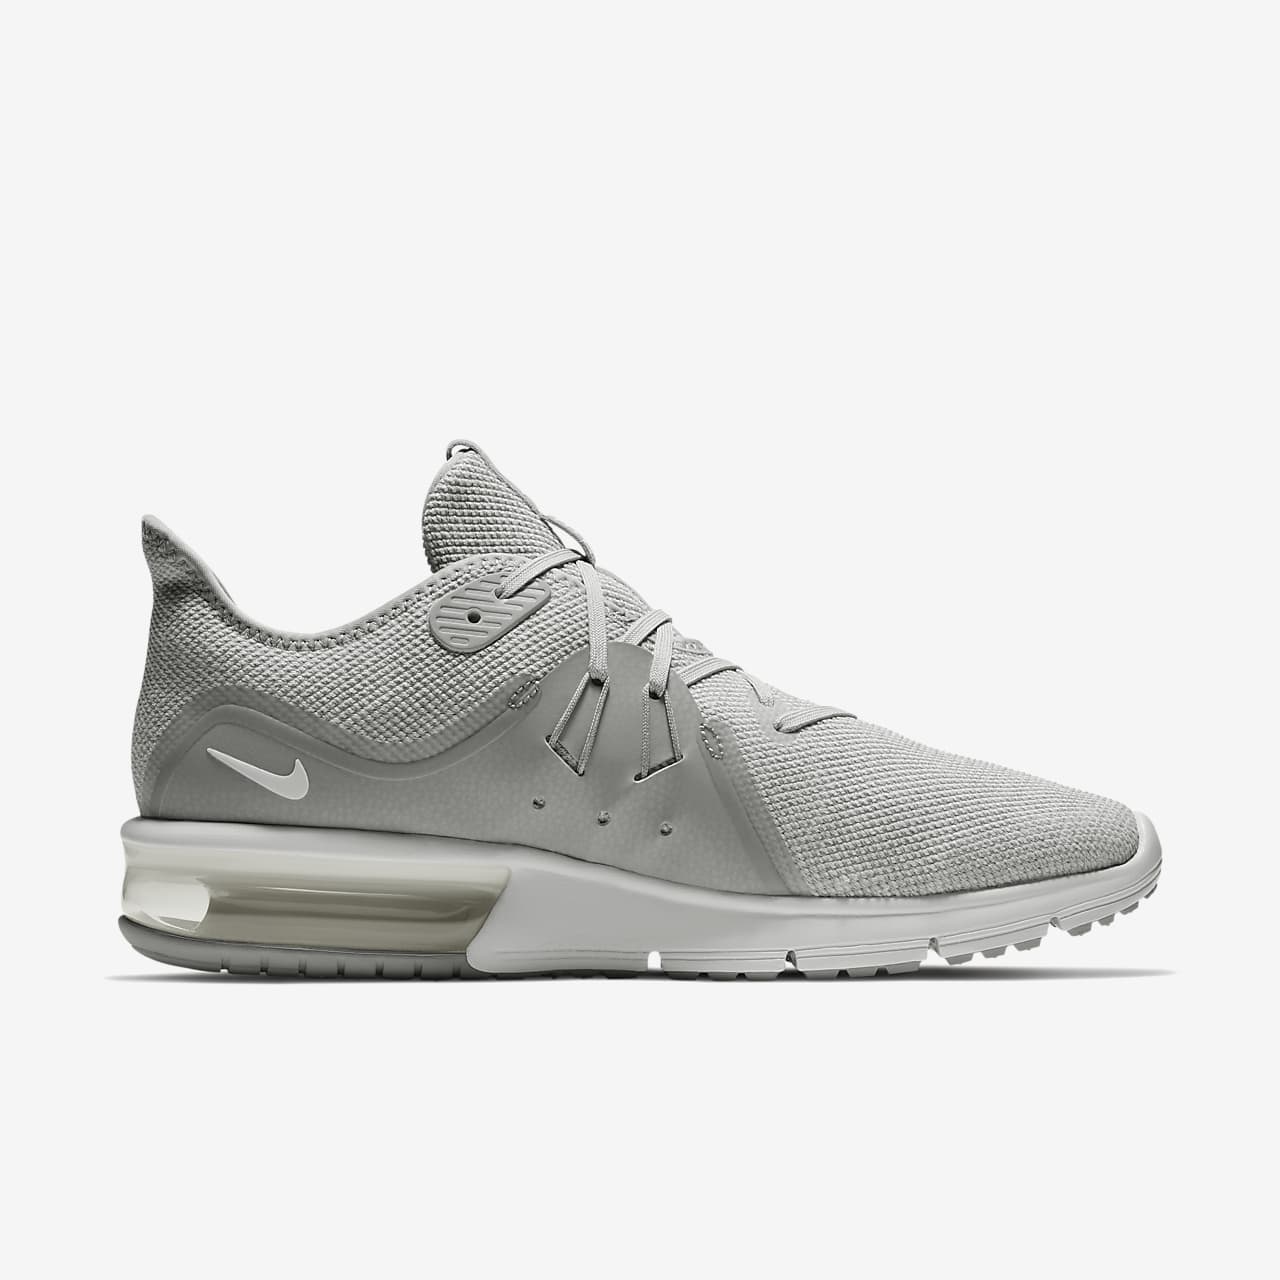 mens nike air max sequent running shoe